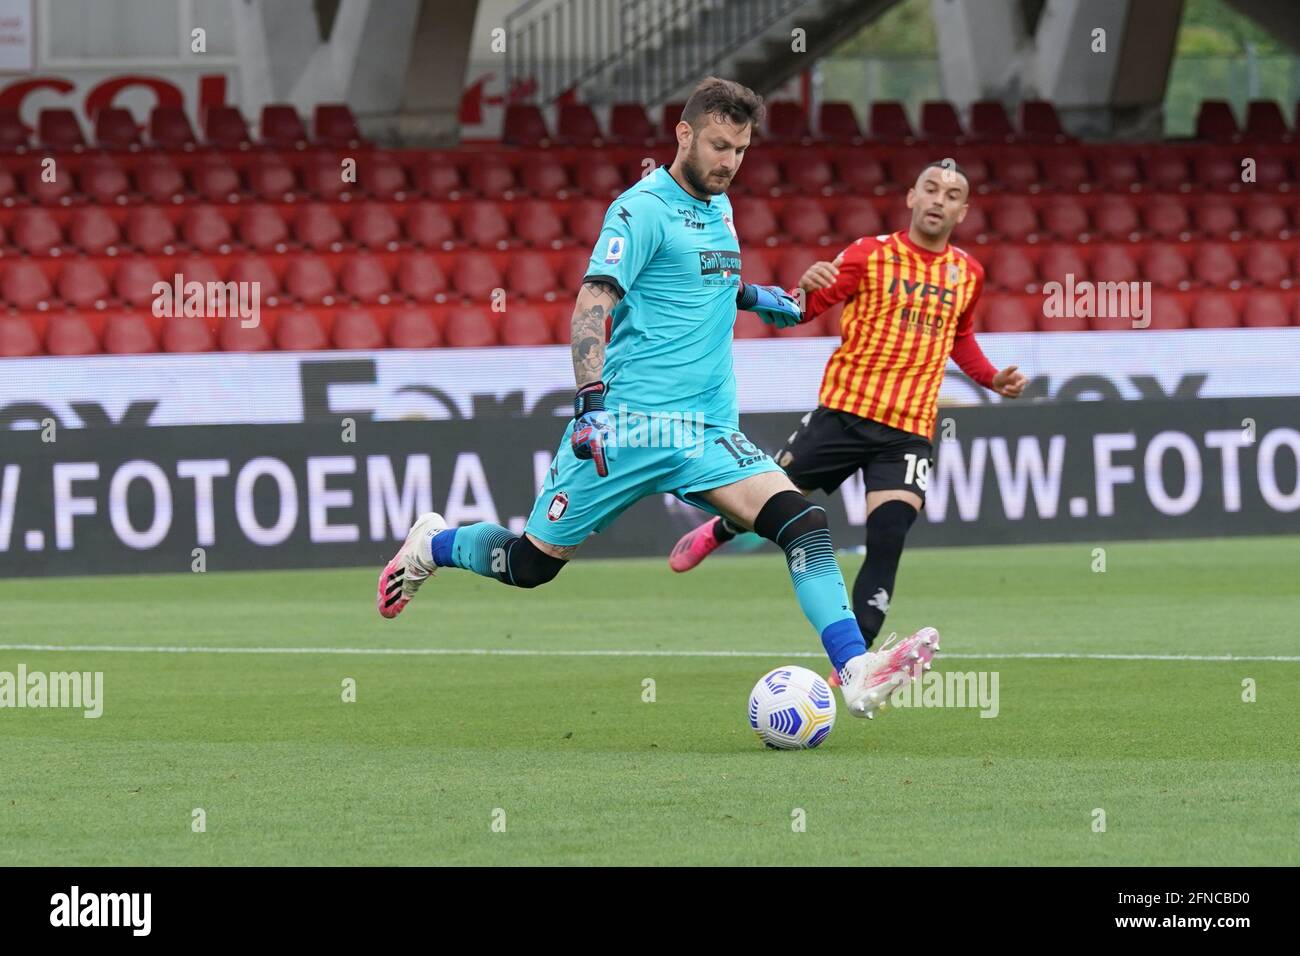 Benevento, Italy. 16th May, 2021. Marco Festa (Crotone FC) during Benevento  Calcio vs FC Crotone, Italian football Serie A match in Benevento, Italy,  May 16 2021 Credit: Independent Photo Agency/Alamy Live News